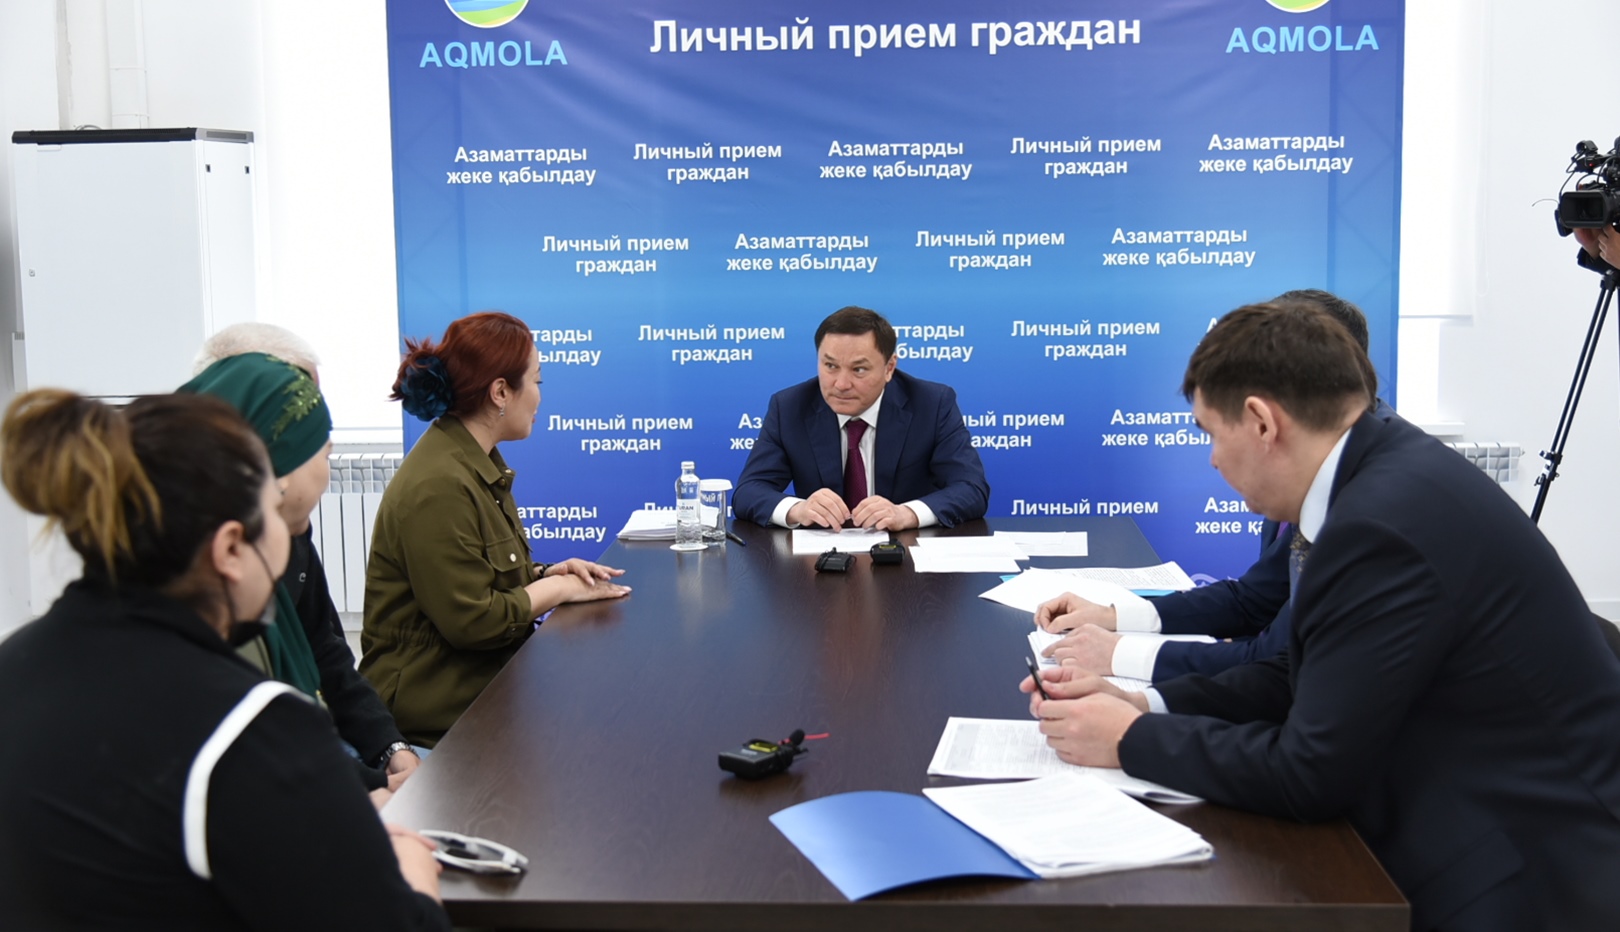 Questions are important, problems are acute During the next working trip, the head of the region Yermek Marzhikpayev met with residents of Koshy, Tselinograd and Korgalzhyn districts